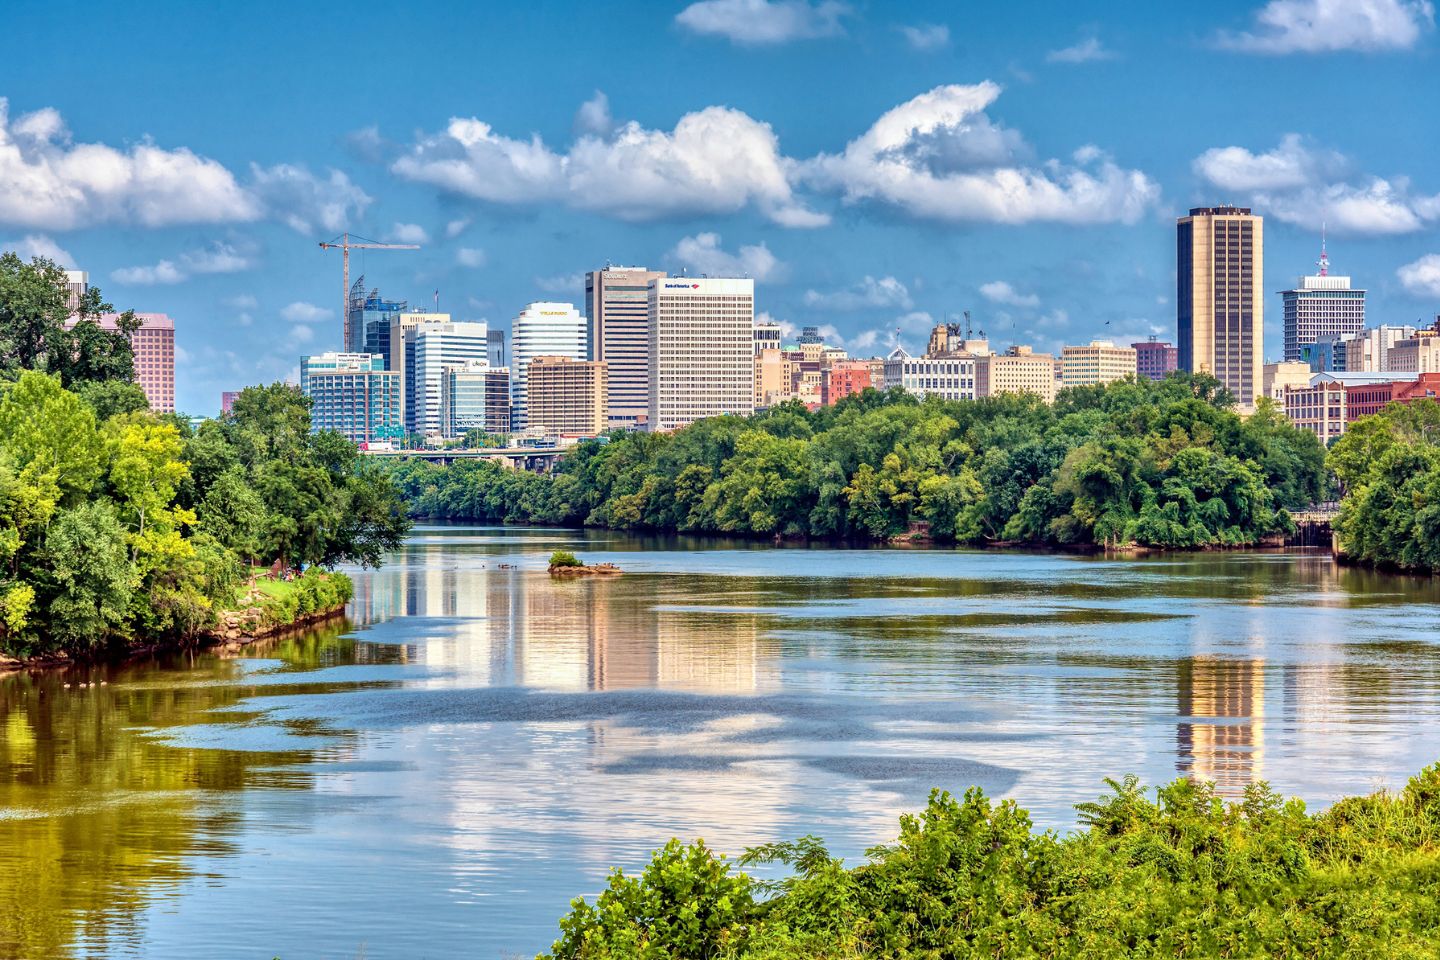 Richmond, Virginia's Online Hub Works To Attract Black Tourists, Here's How